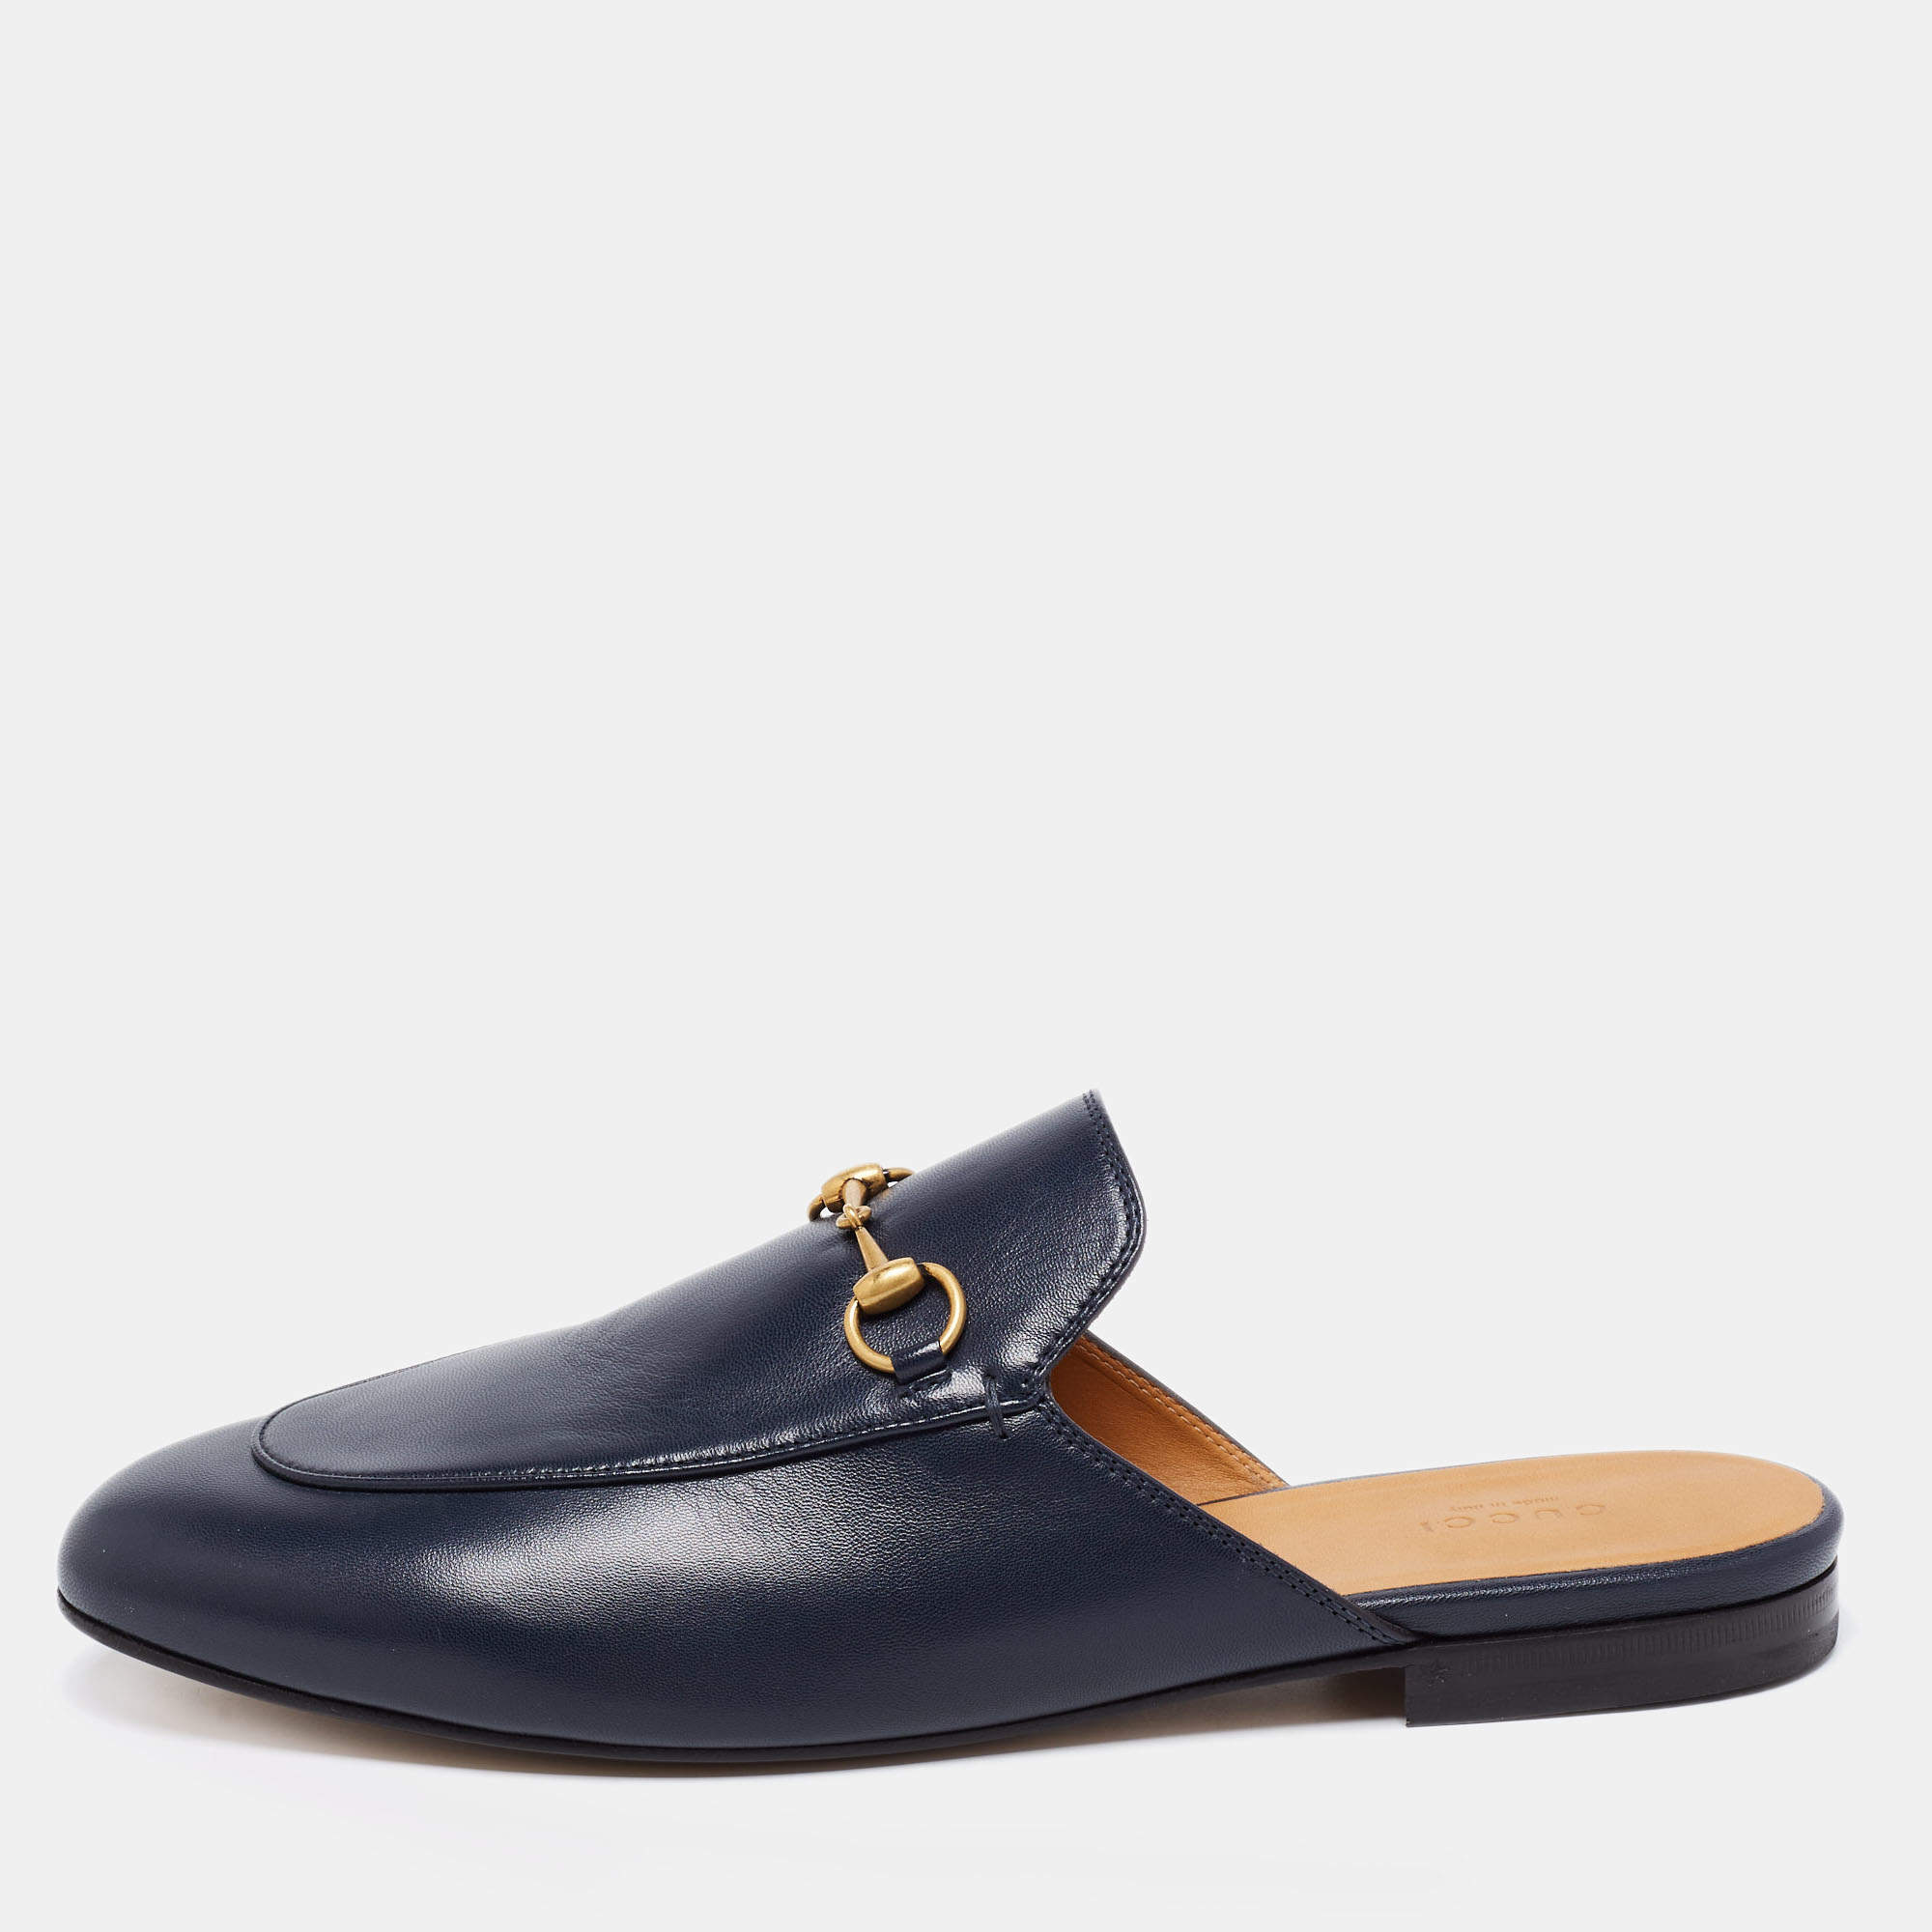 Gucci Navy Blue Leather Princetown Flat Mules Size 41.5